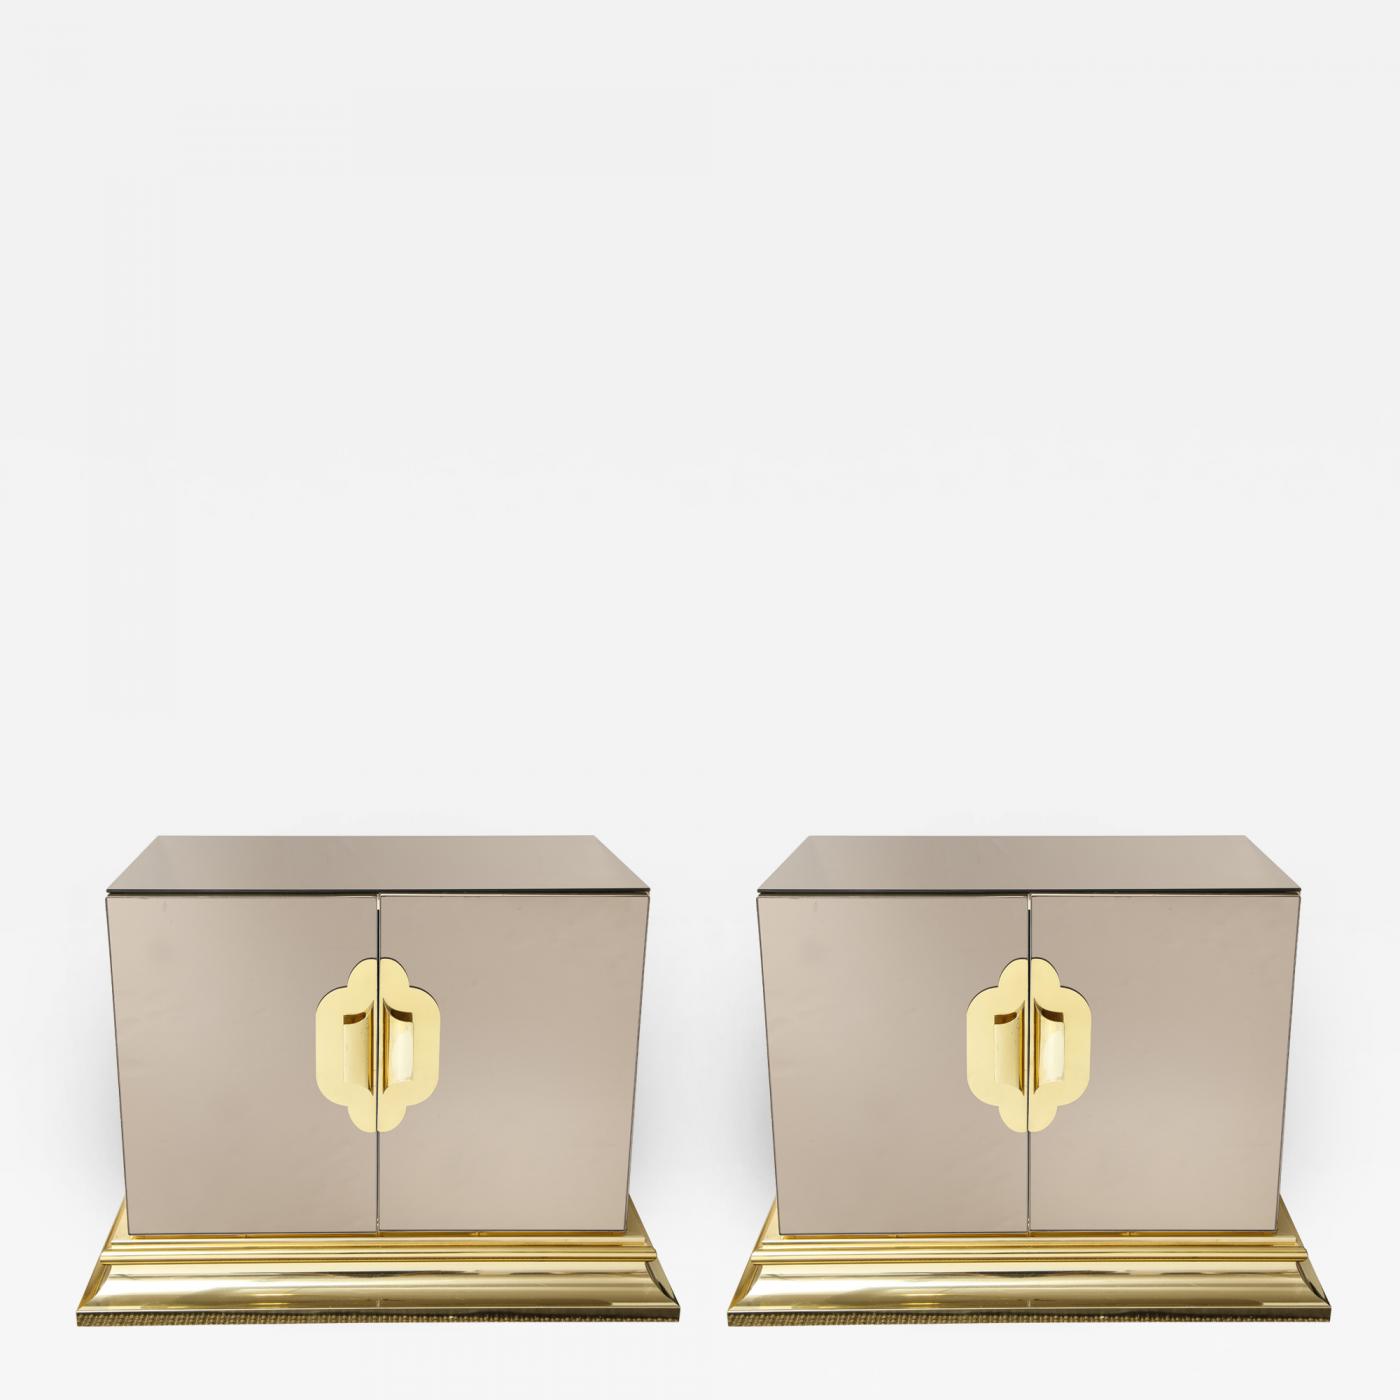 Ello Furniture Co Pair Of Vintage Mirrored Chests Nightstands With Brass Handles